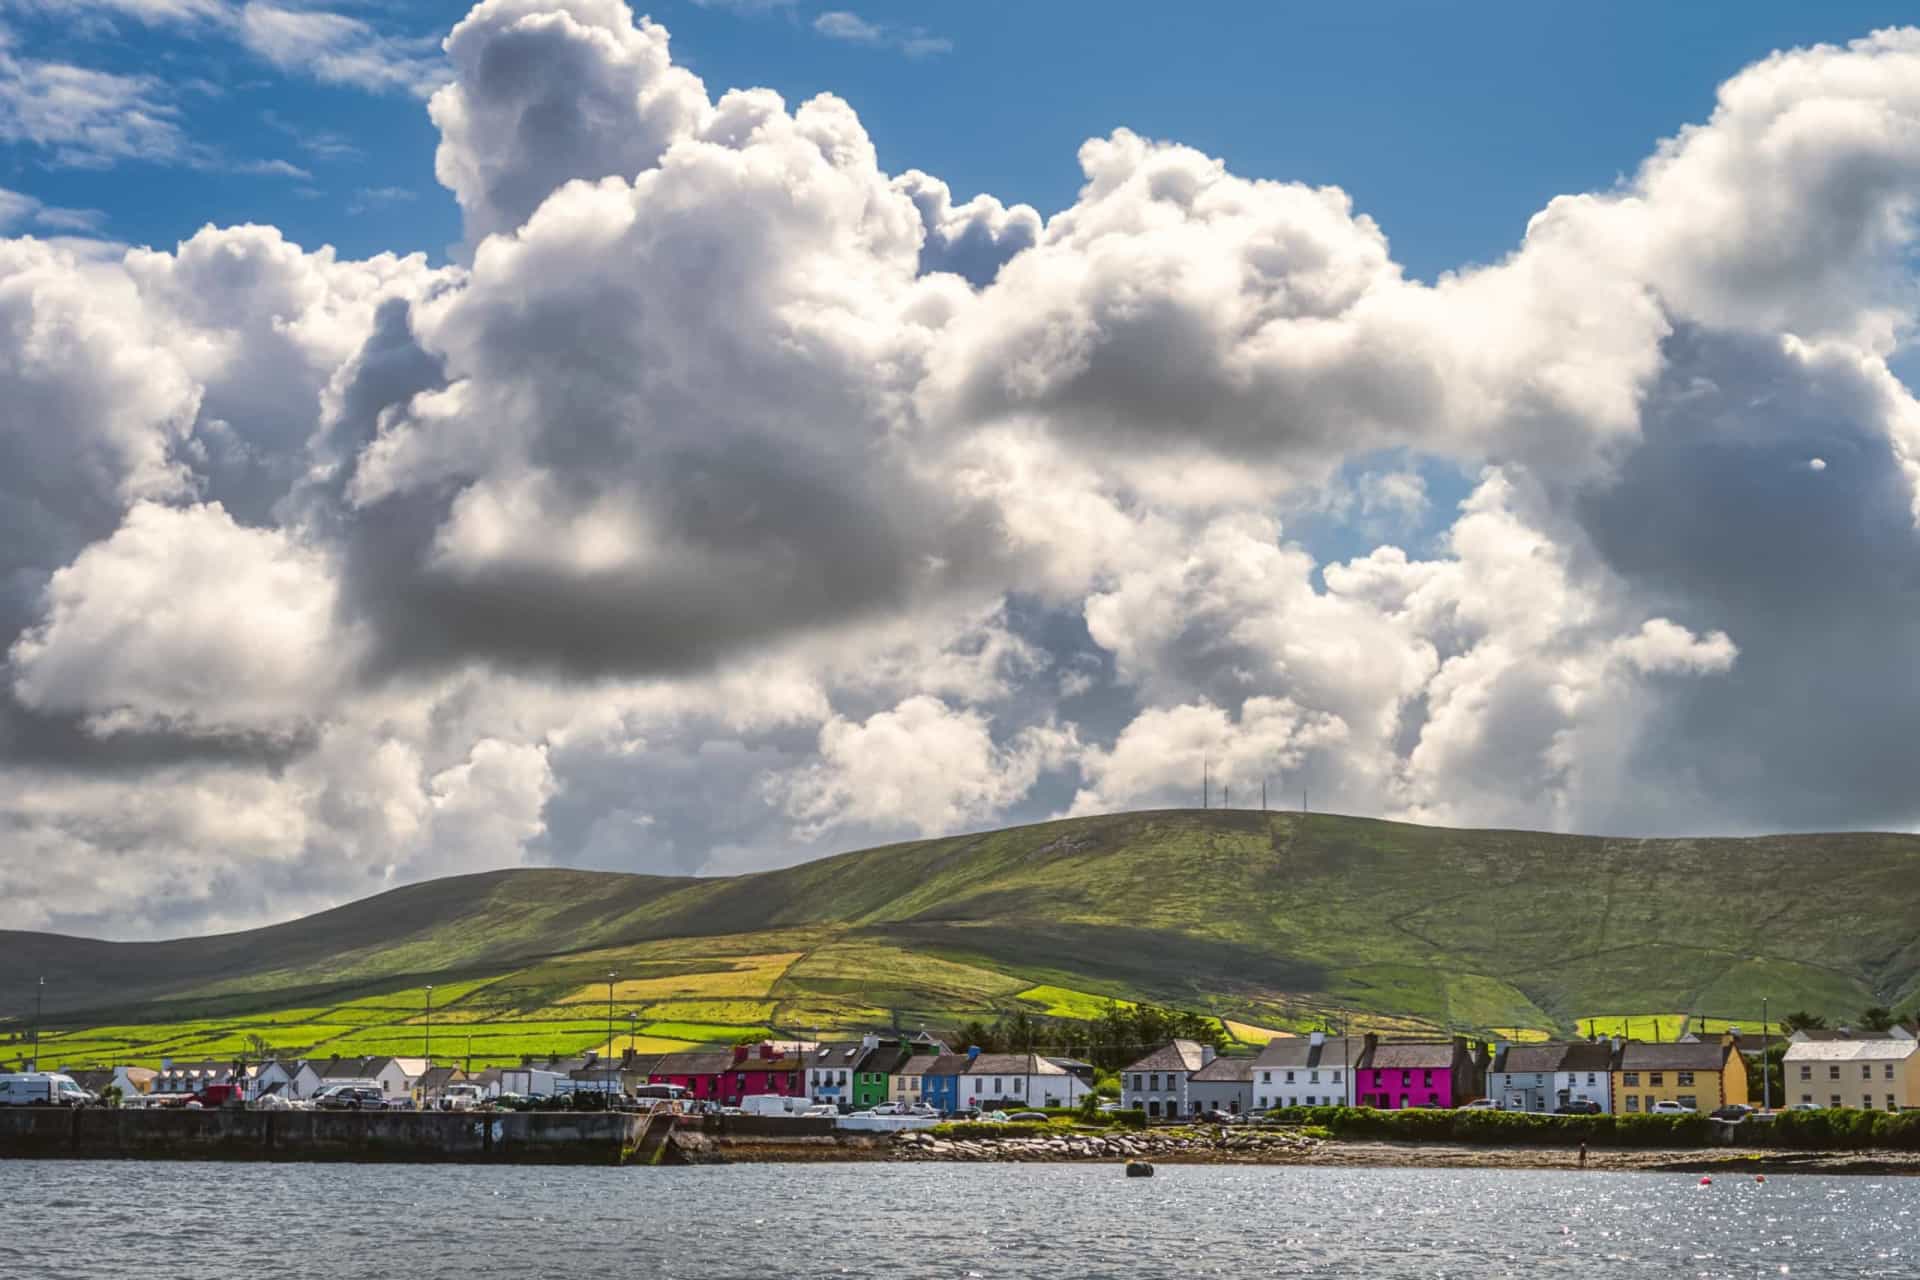 <p>Also located on the Iveragh peninsula is Portmagee, named for Captain Theobald Magee, a notorious 18th-century smuggler. During the summer, visitors to Derrynane can take boat trips to the <a href="https://www.starsinsider.com/travel/471526/skellig-the-island-luke-skywalker-called-home" rel="noopener">Skellig</a> Islands, a pair of rocky islets one of which cradles a 6th-century monastic settlement, a UNESCO World Heritage Site.</p>